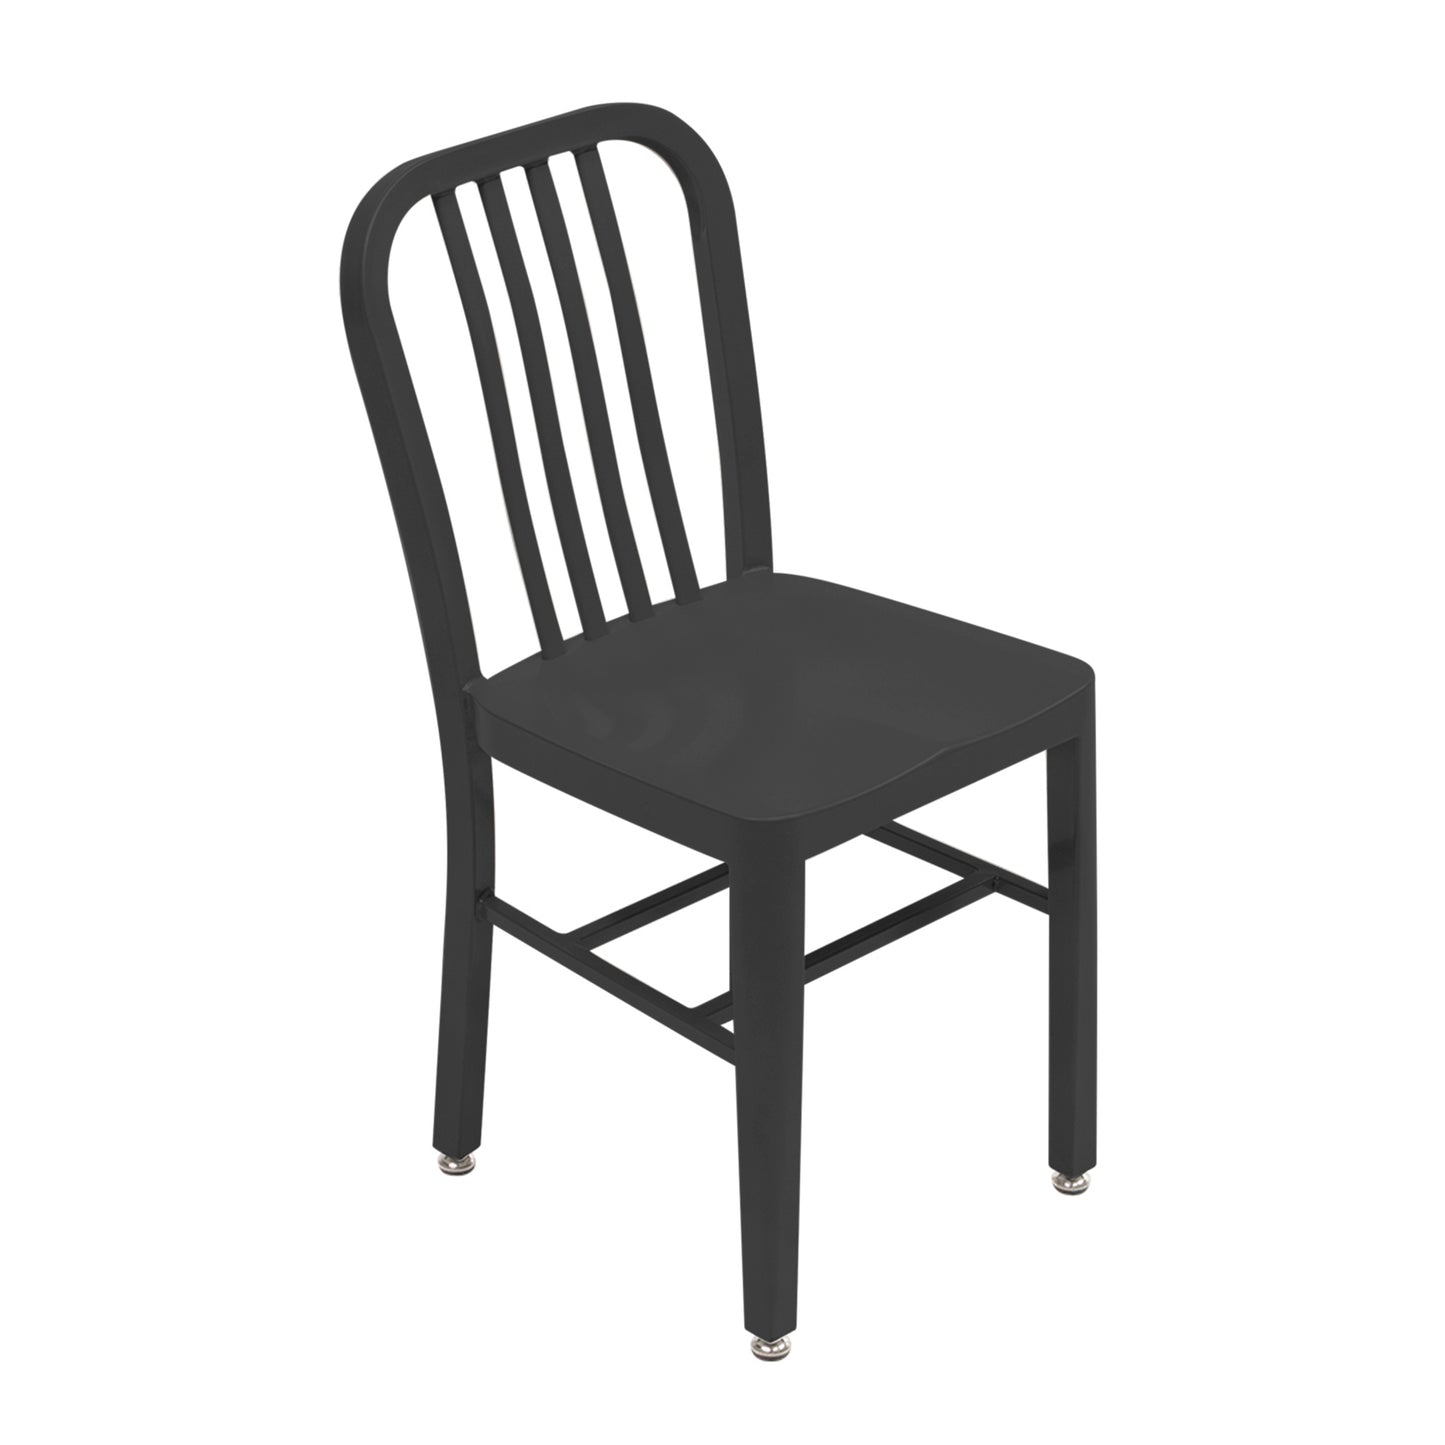 AmTab Cafe Chair - 15"W x 20"L x 33.25"H - Seat Height 18.5"H  (AMT-CAFECHAIR-5)